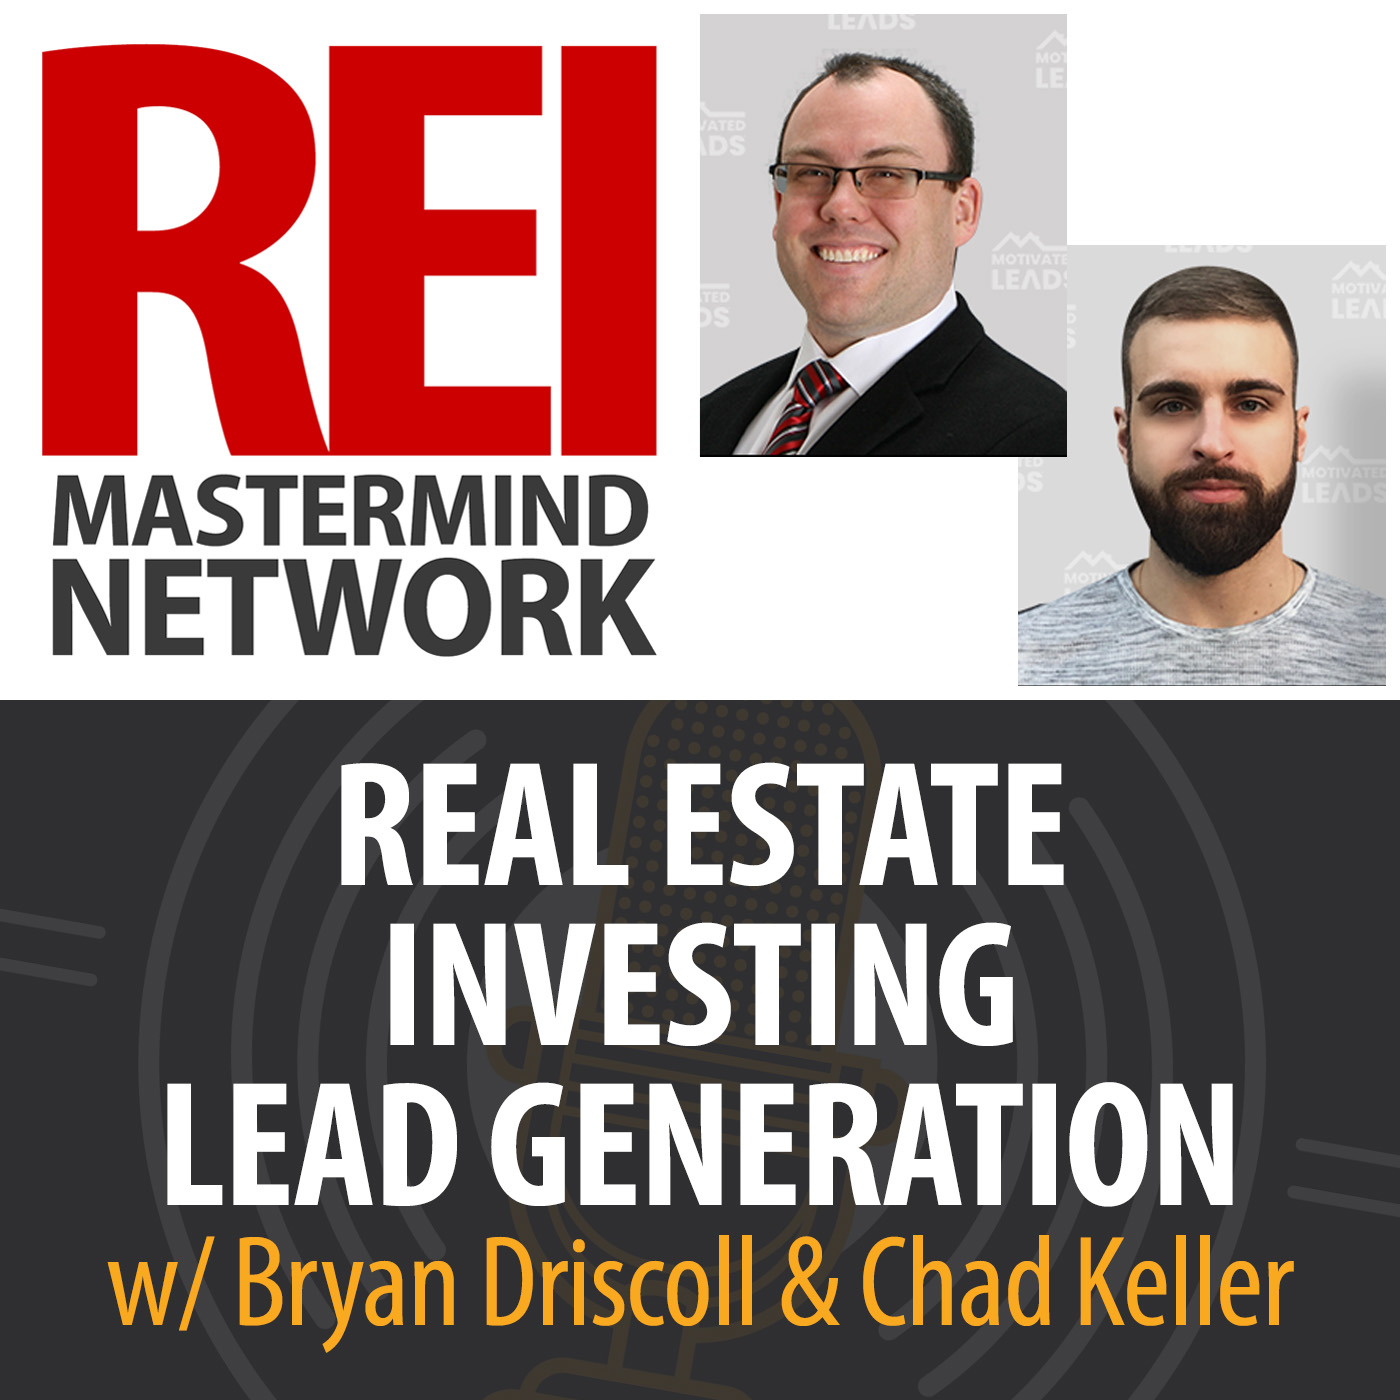 Real Estate Investing Lead Generation with Bryan Driscoll and Chad Keller